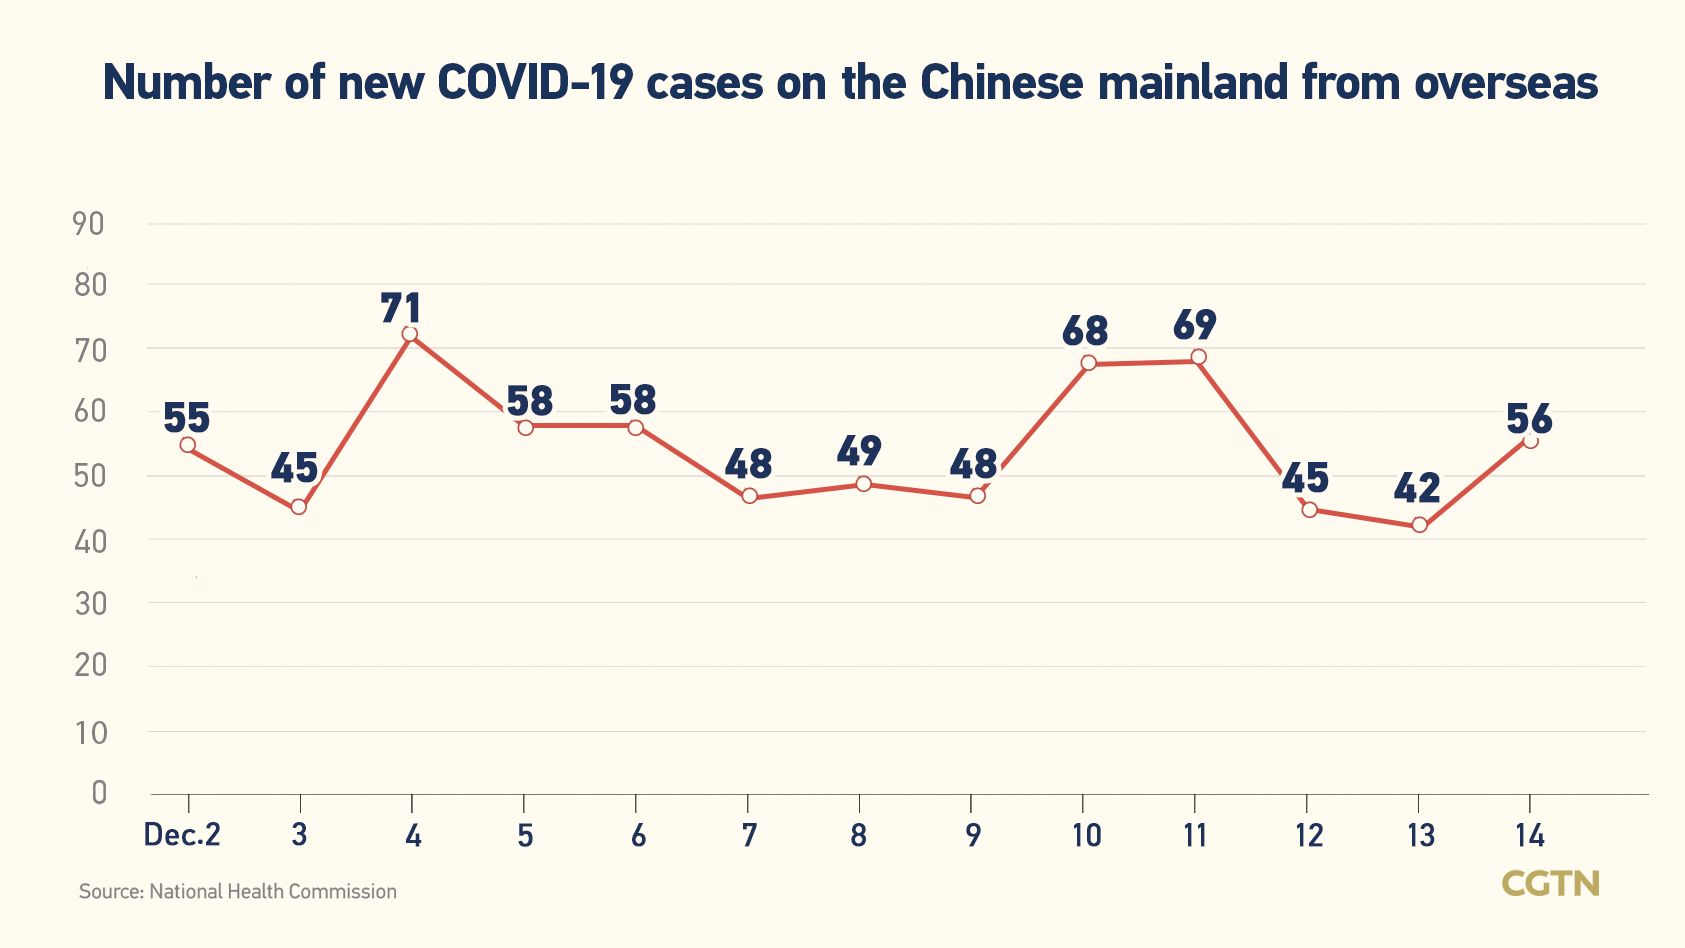 Chinese mainland records 2,000 new confirmed COVID-19 cases